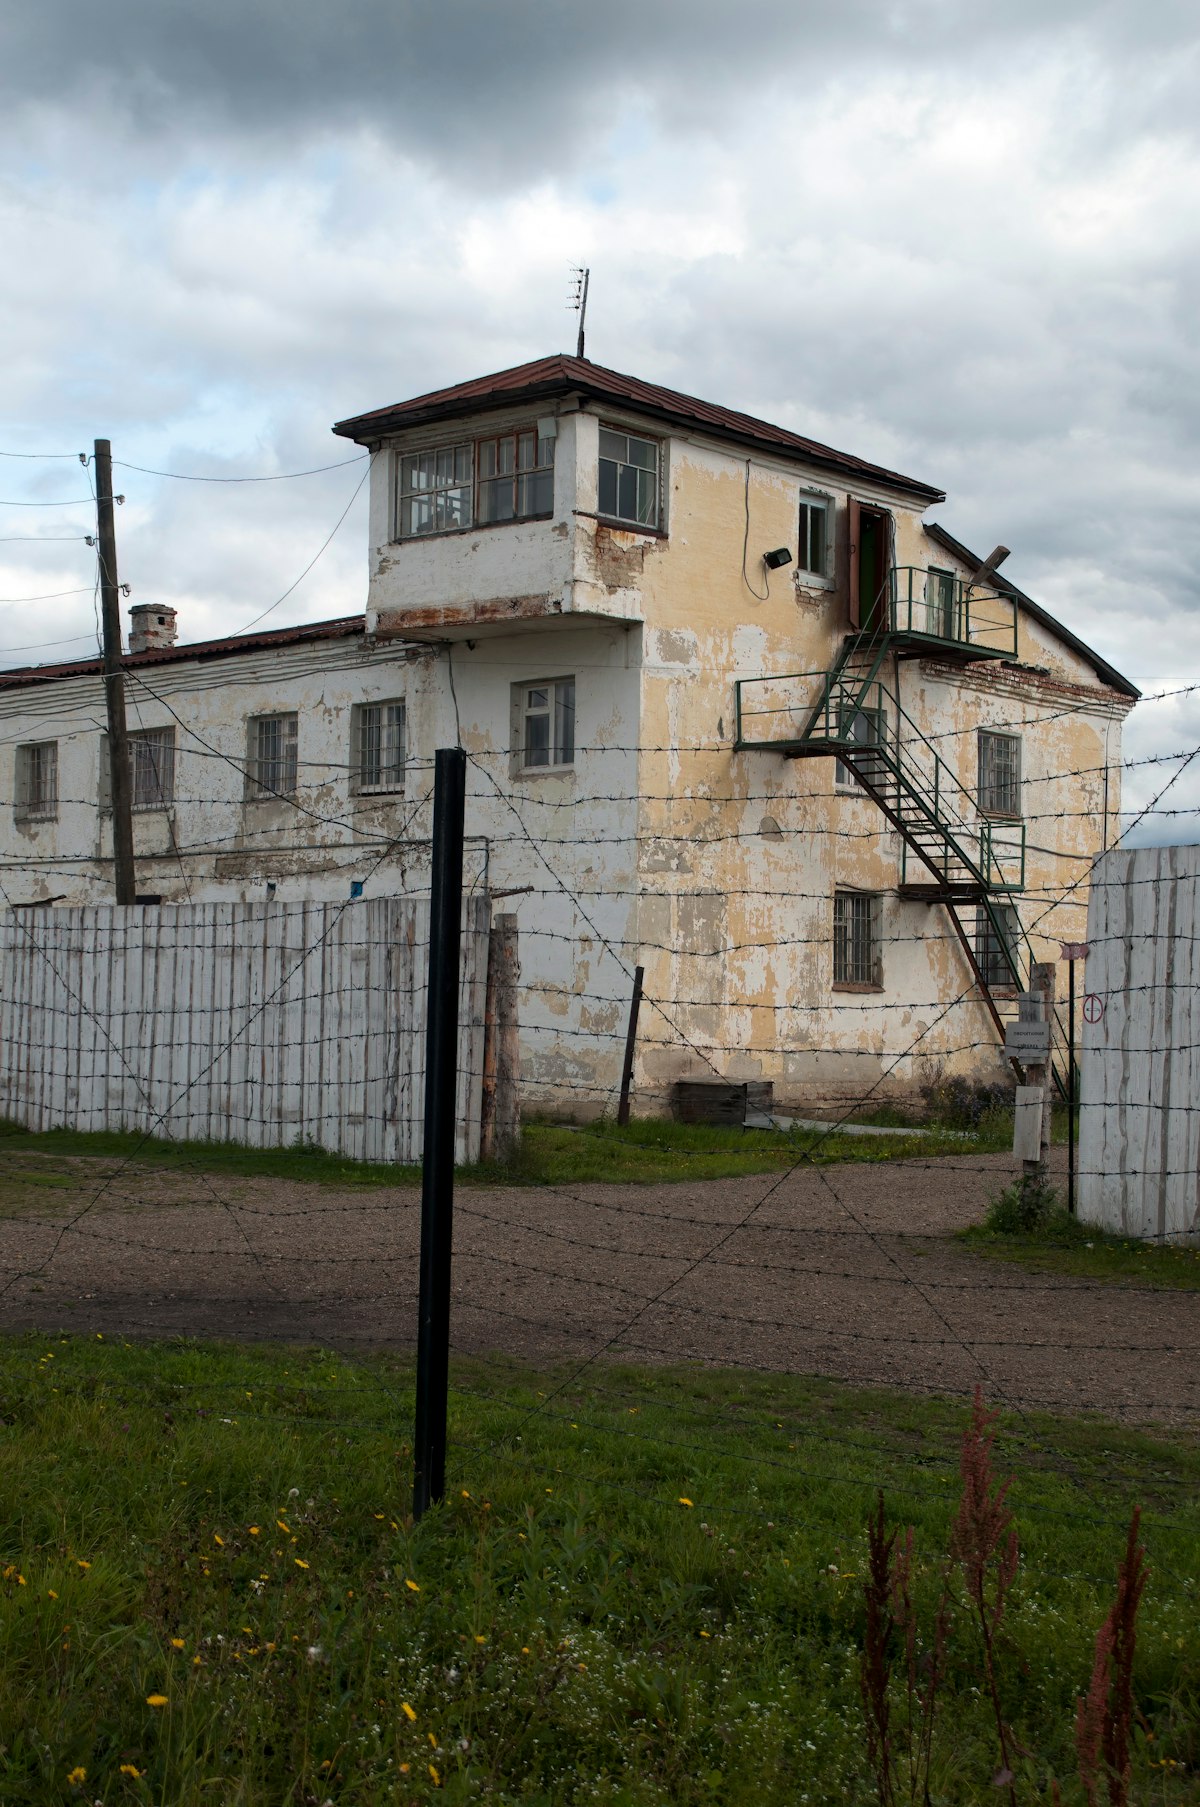 Perm Russia Aug 28 2012, building at the The Museum of the History of Political Repression Perm-36; Shutterstock ID 1430166293; purchase_order: 65050; job: ; client: ; other:
1430166293